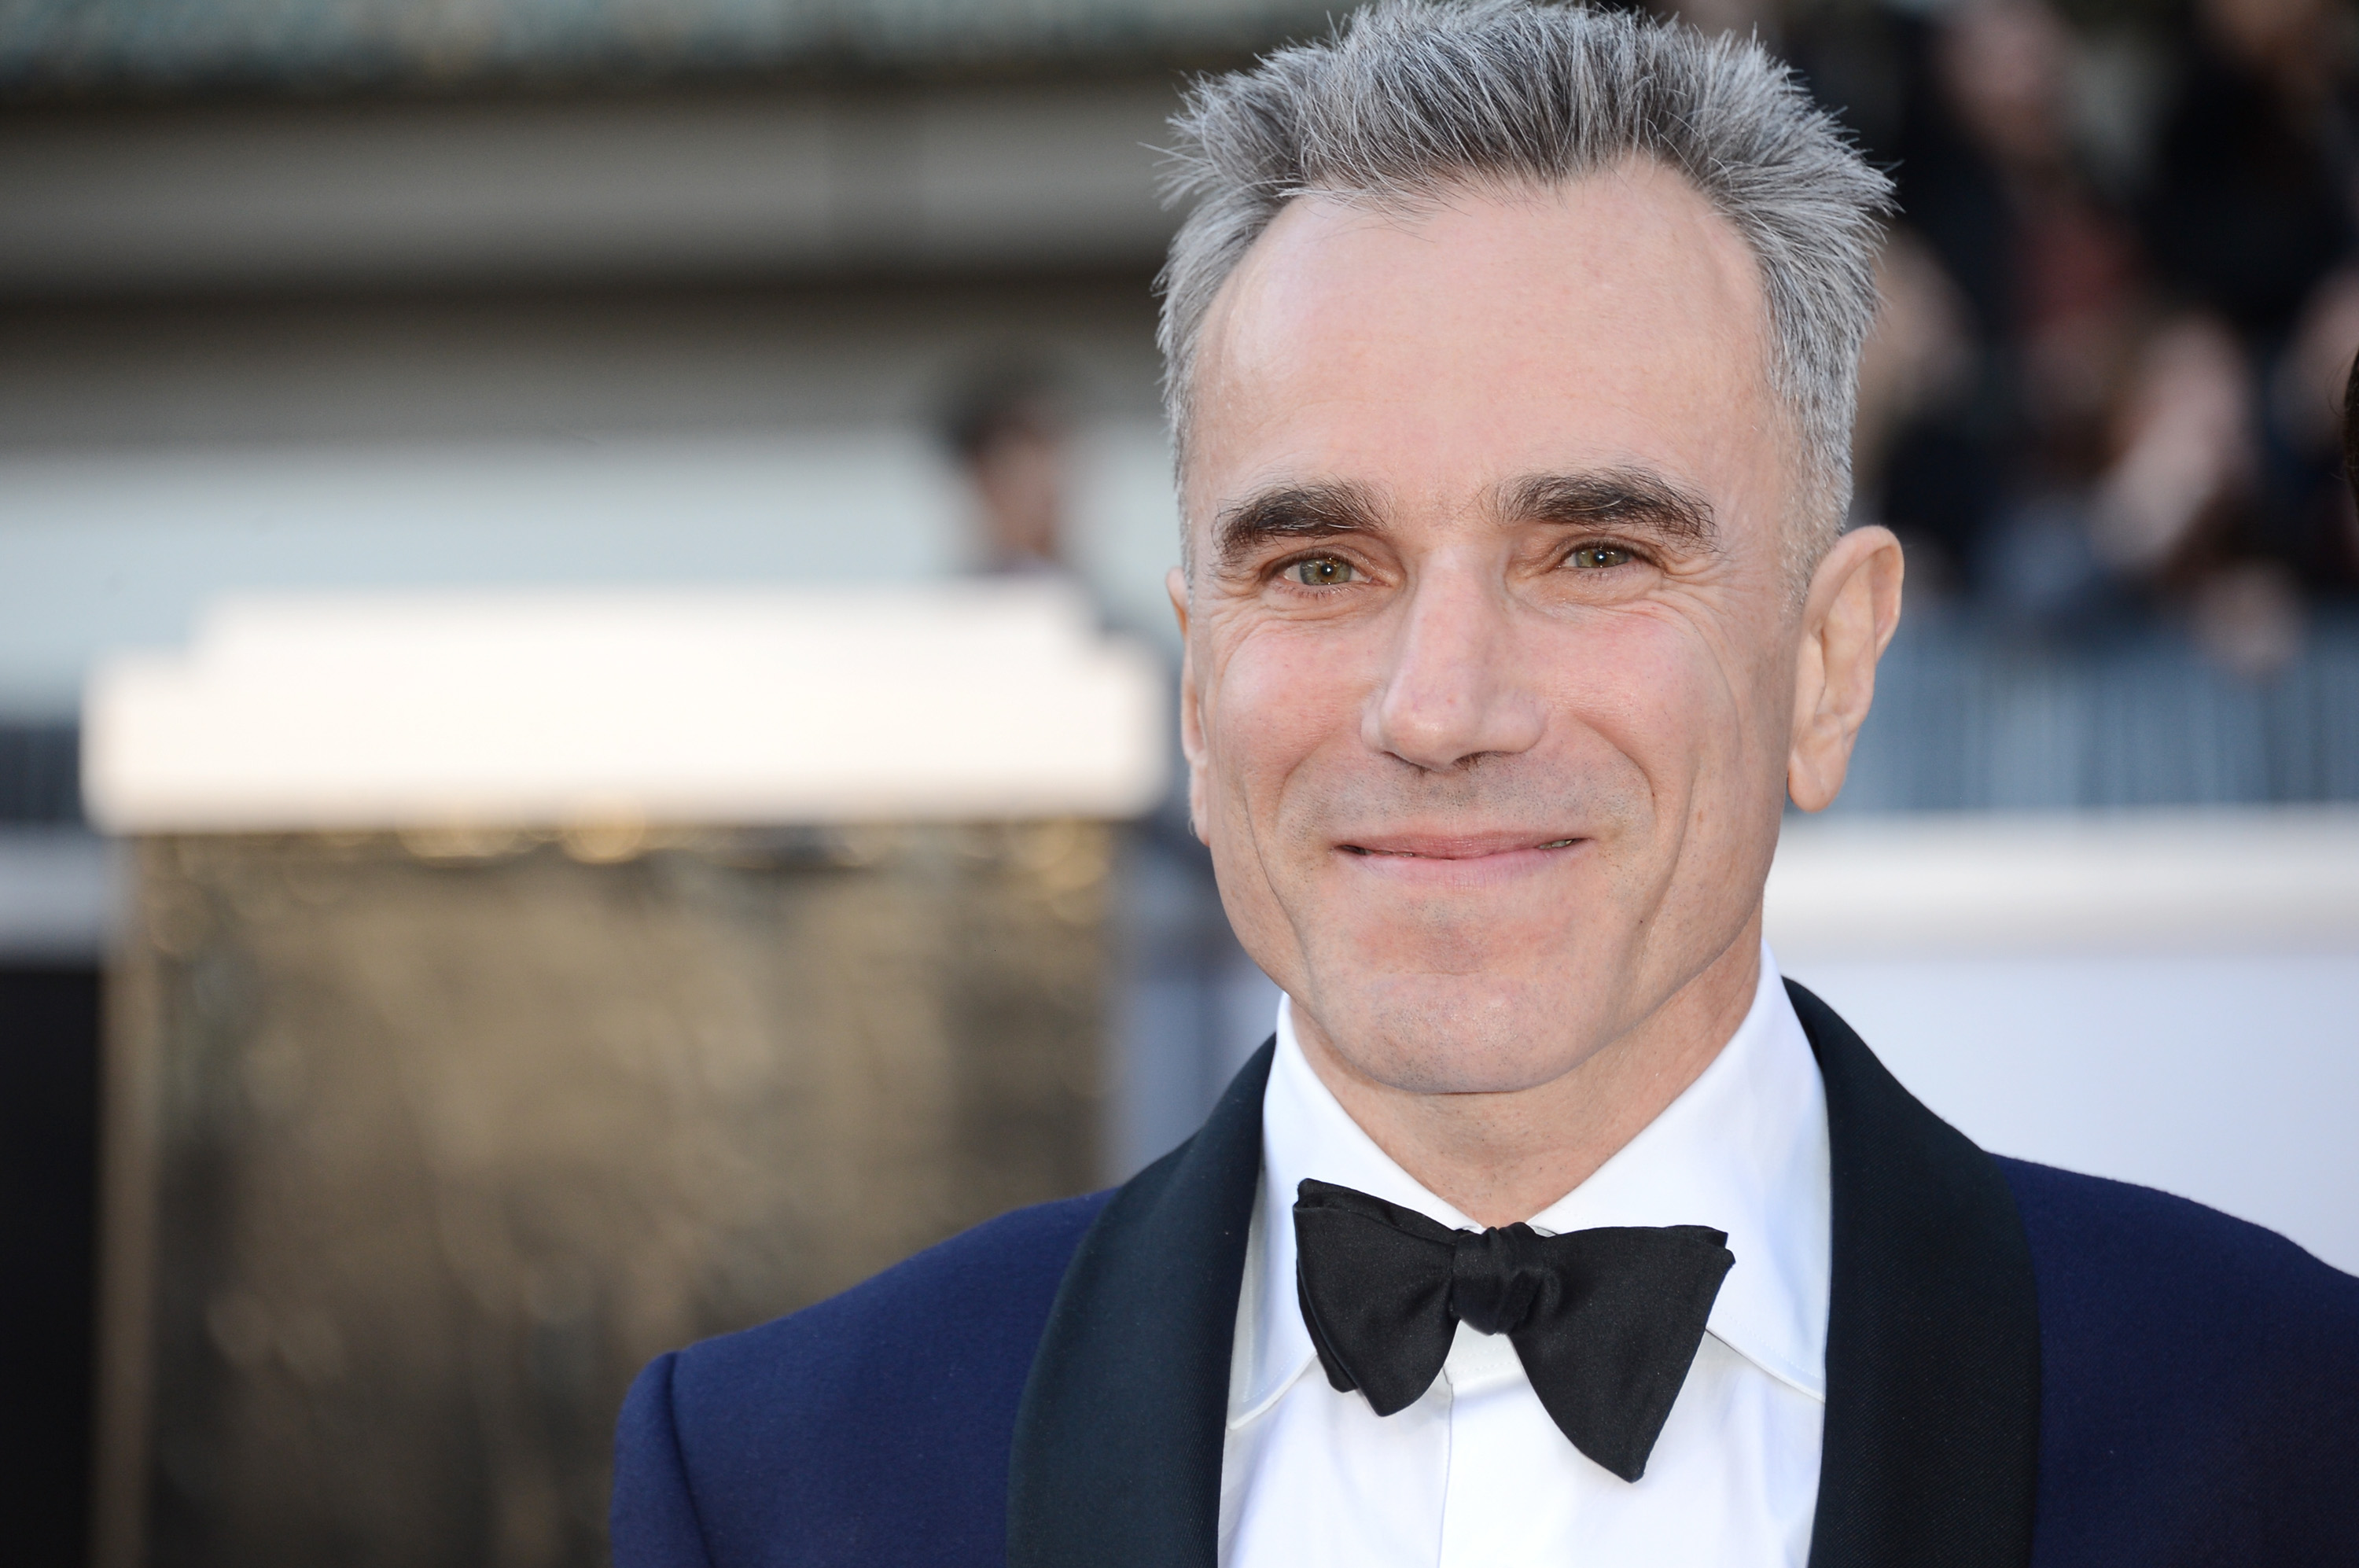 Daniel Day Lewis Looks Unrecognizable On Crutches After Quitting Hollywood Moving To Village